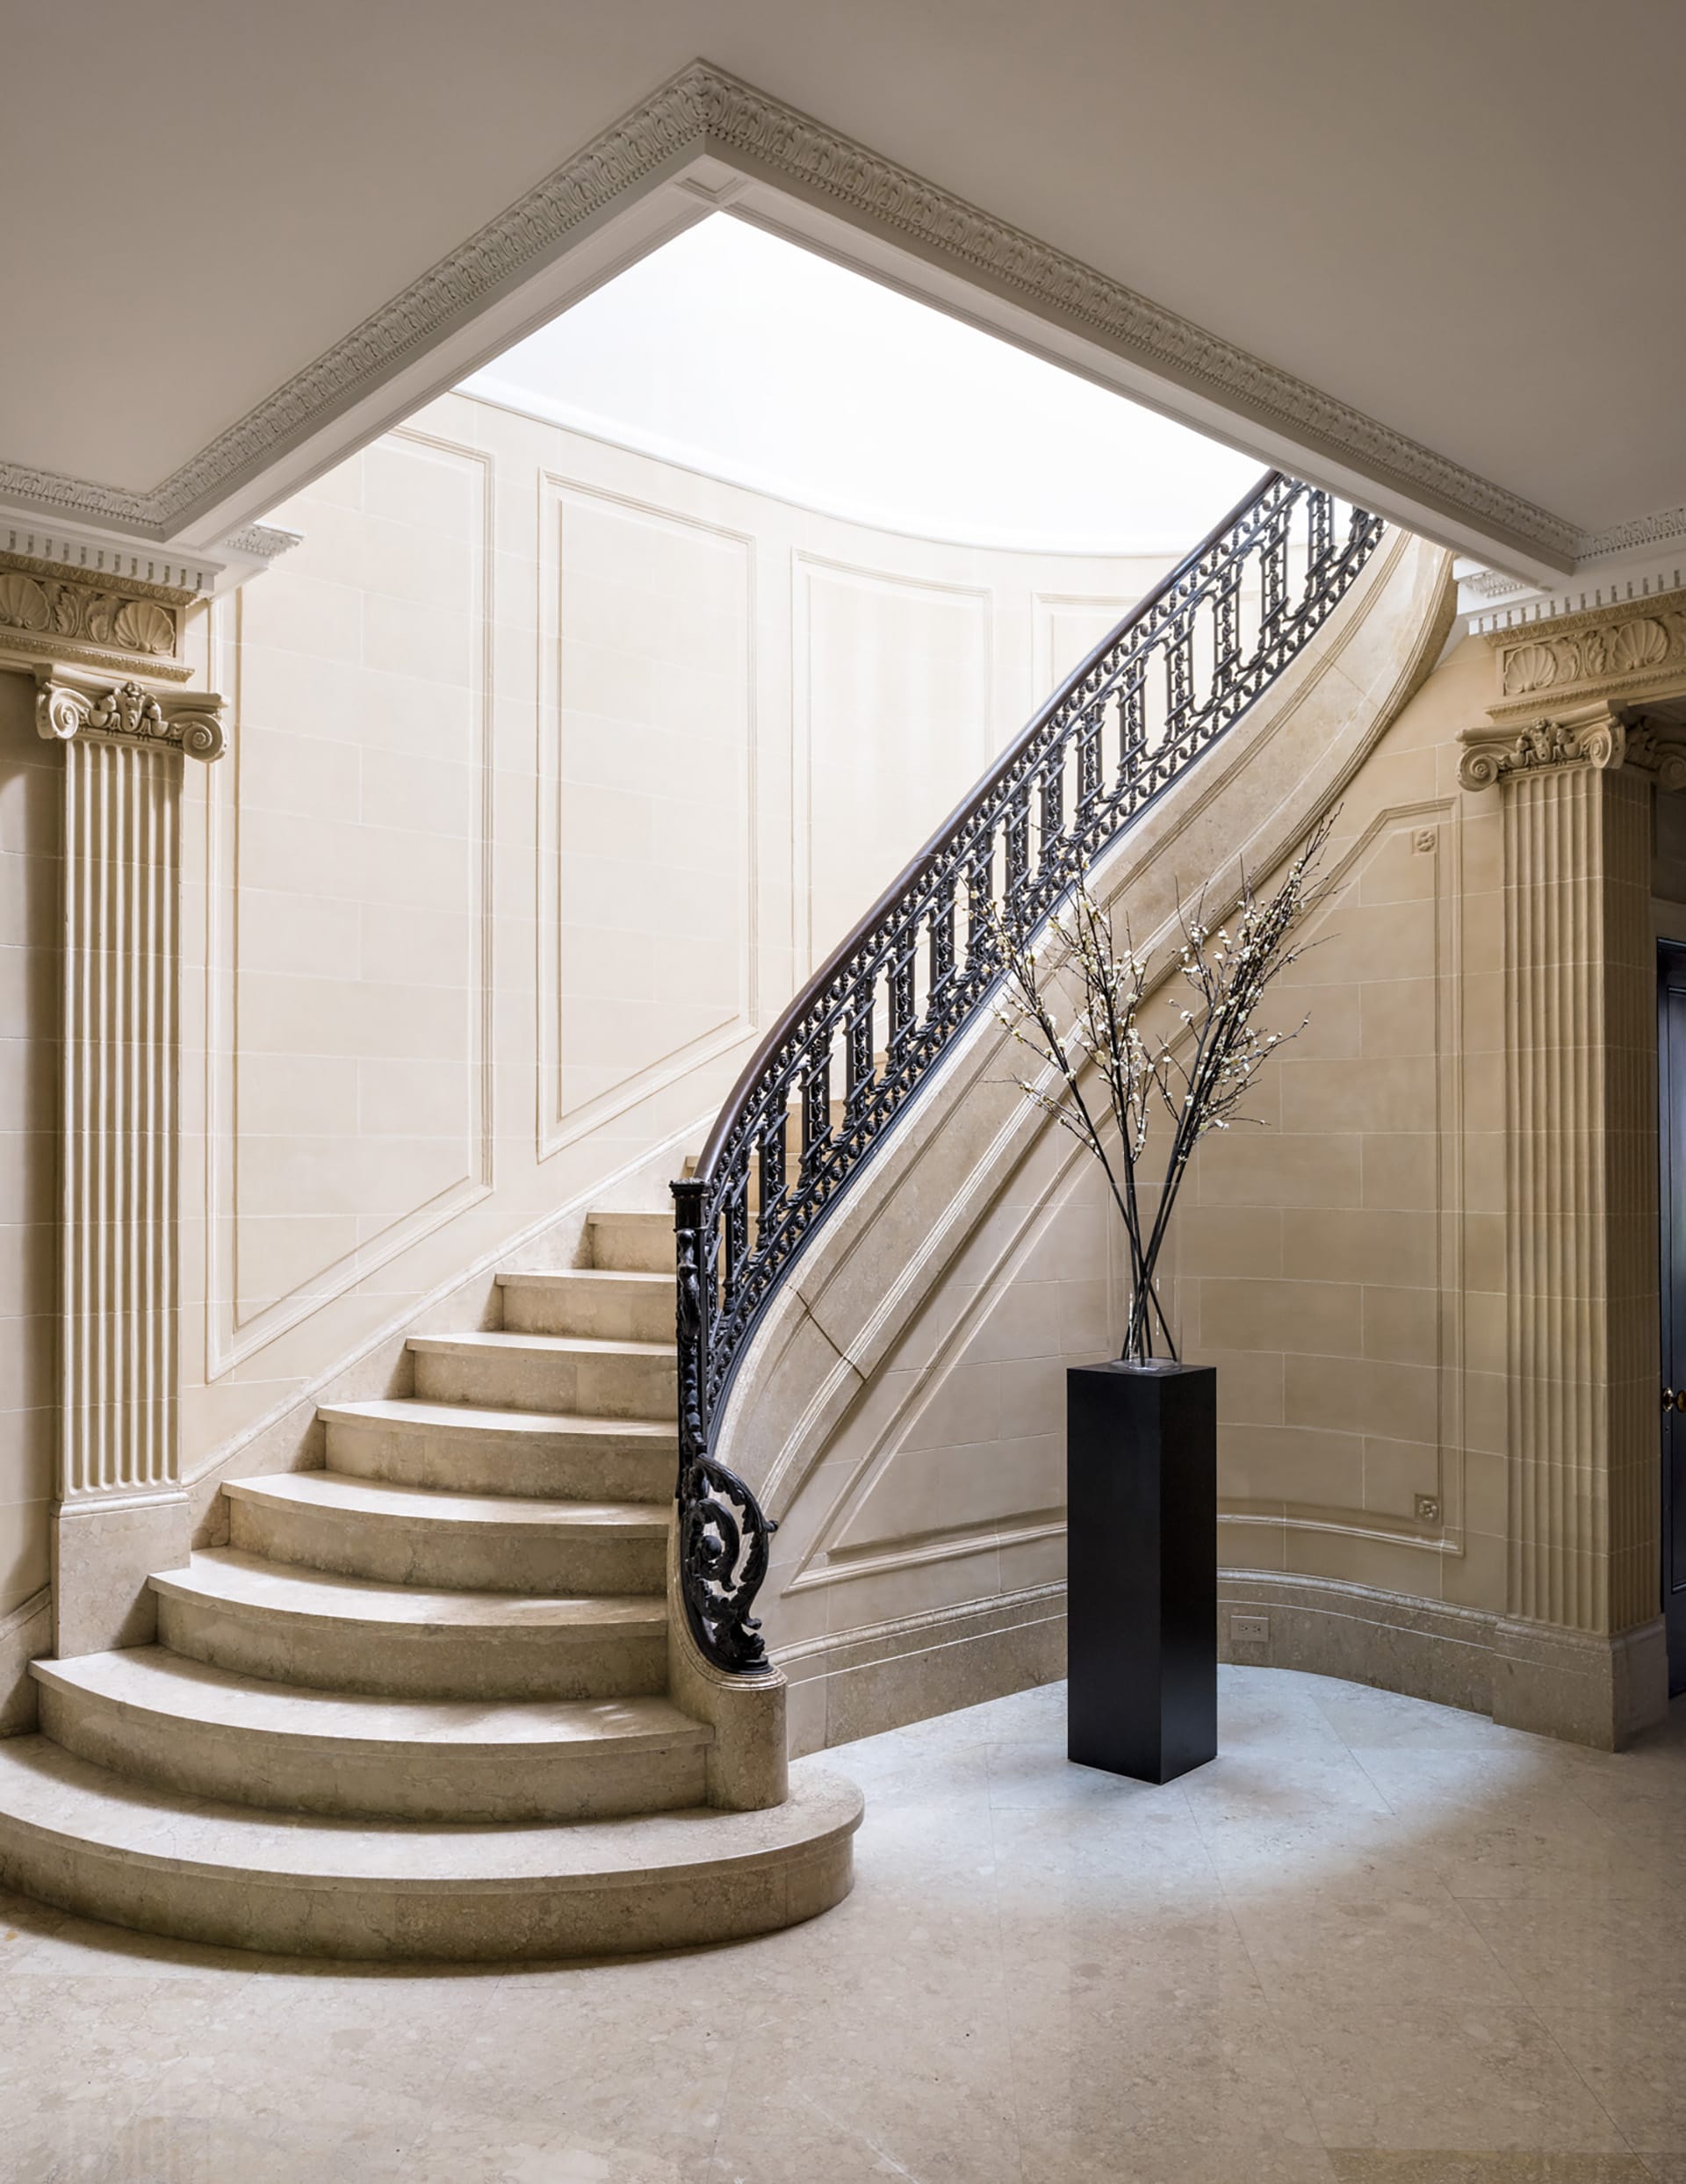 Grand entrance with marble floors, stair, and walls, and intricate crown moldings.